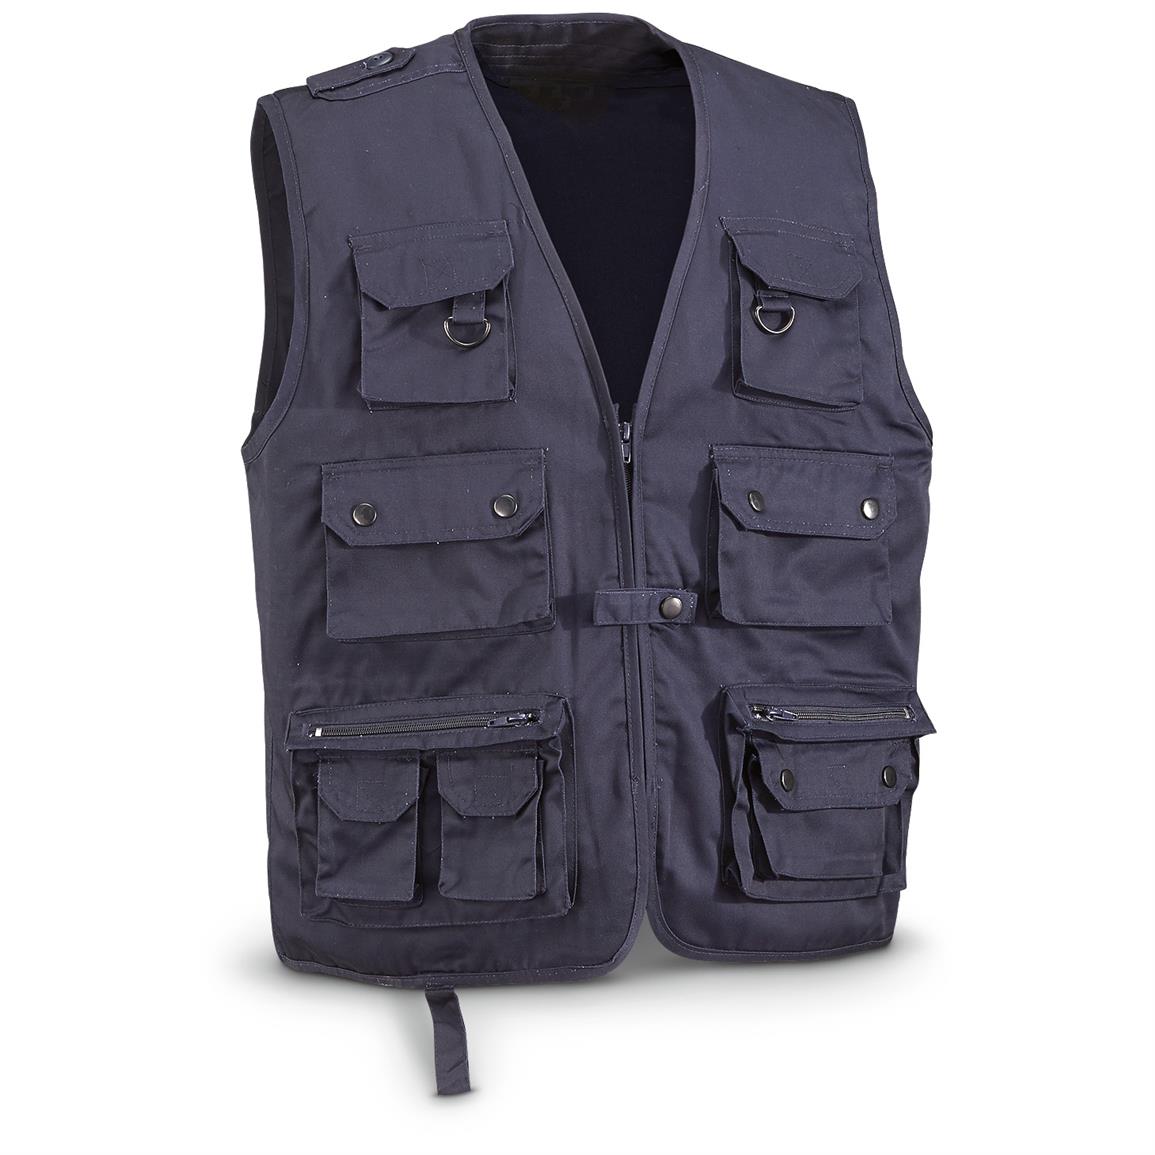 Mil-Tec Shooter's Vest - 652637, Tactical Clothing at Sportsman's Guide